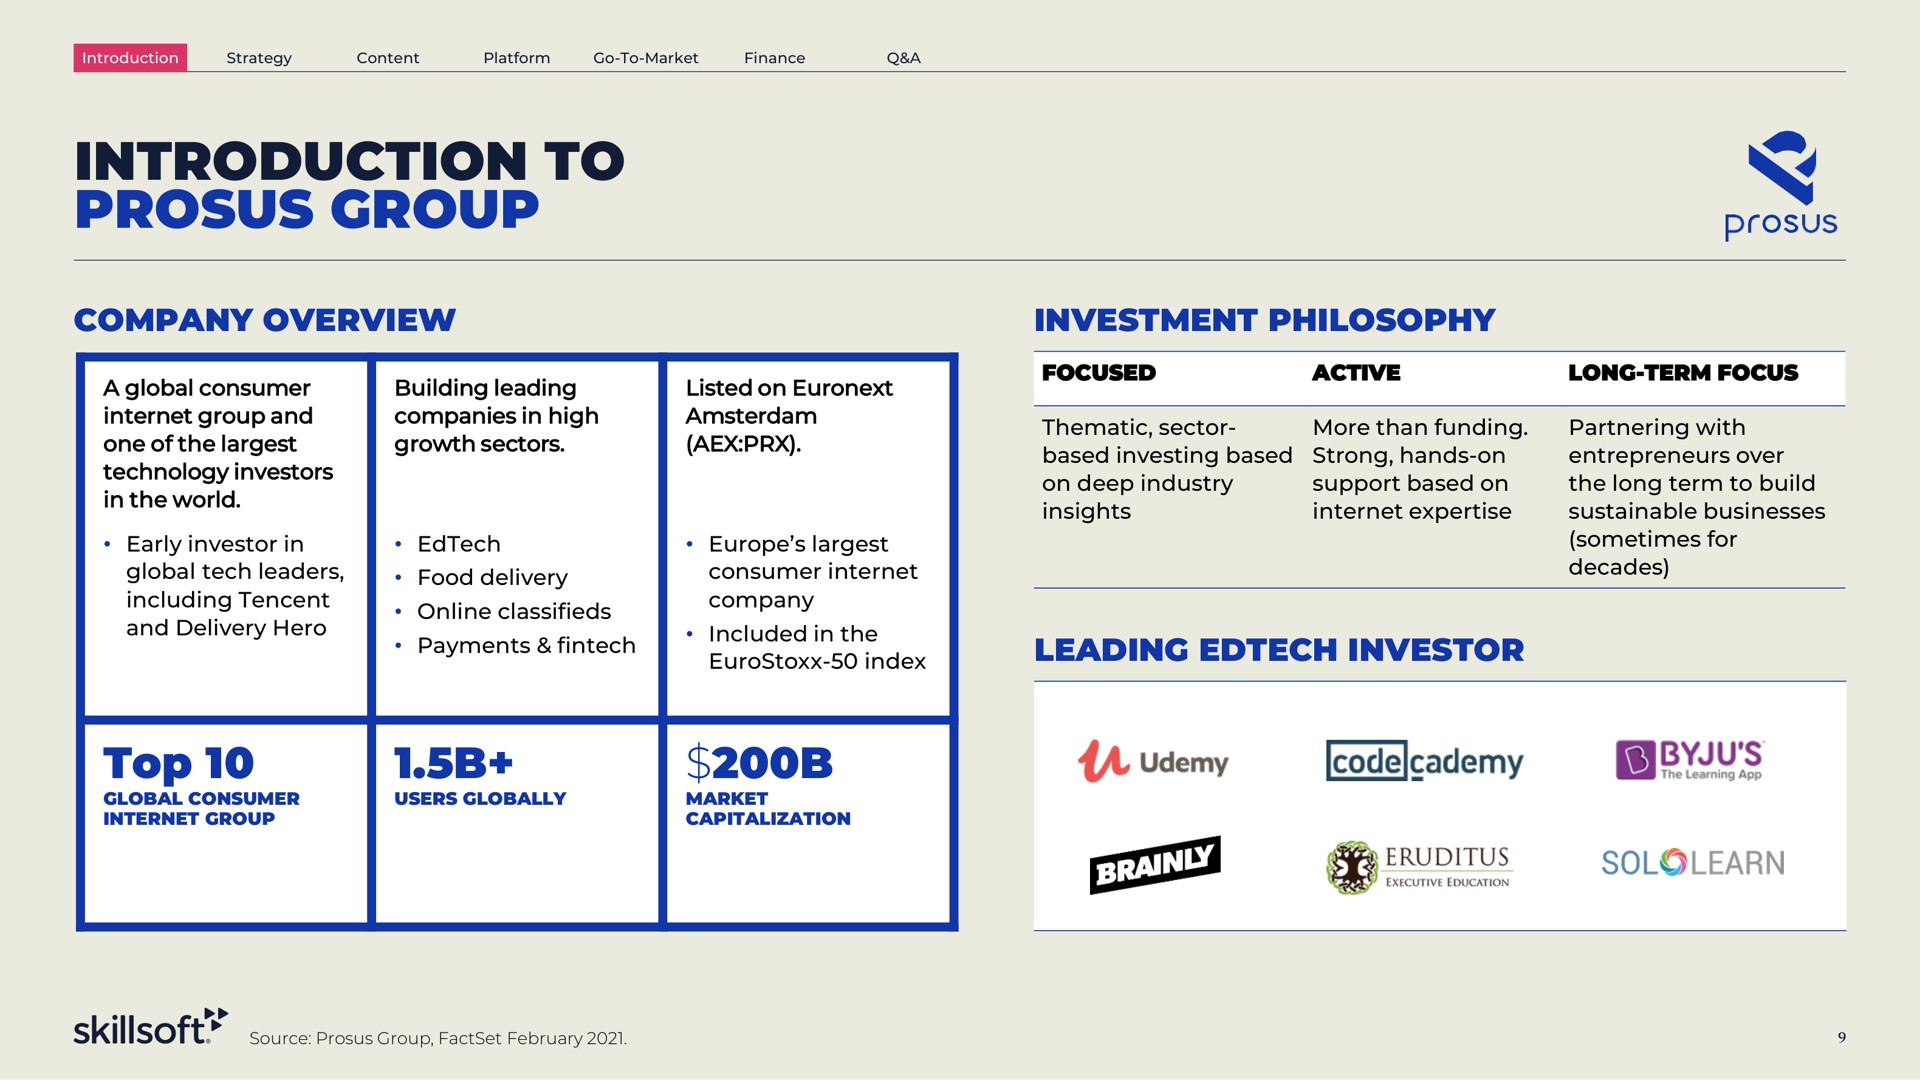 introduction to group company overview investment philosophy leading investor top capitalization a code | Skillsoft